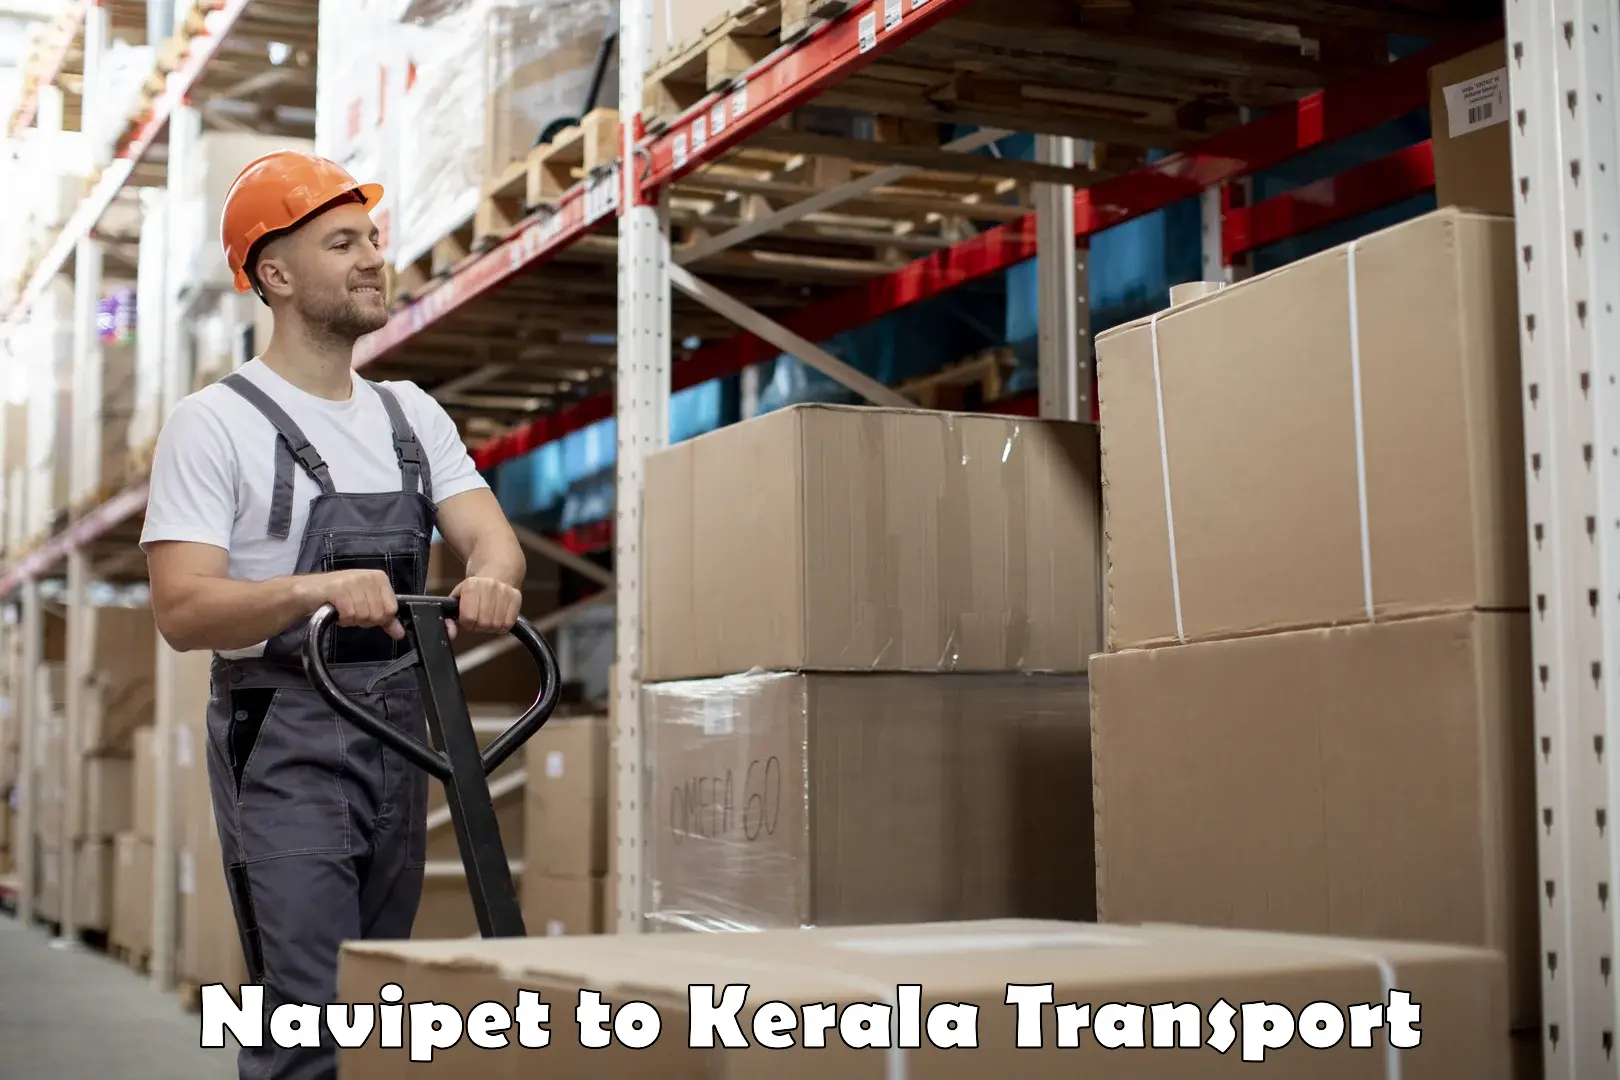 Daily transport service Navipet to Ernakulam